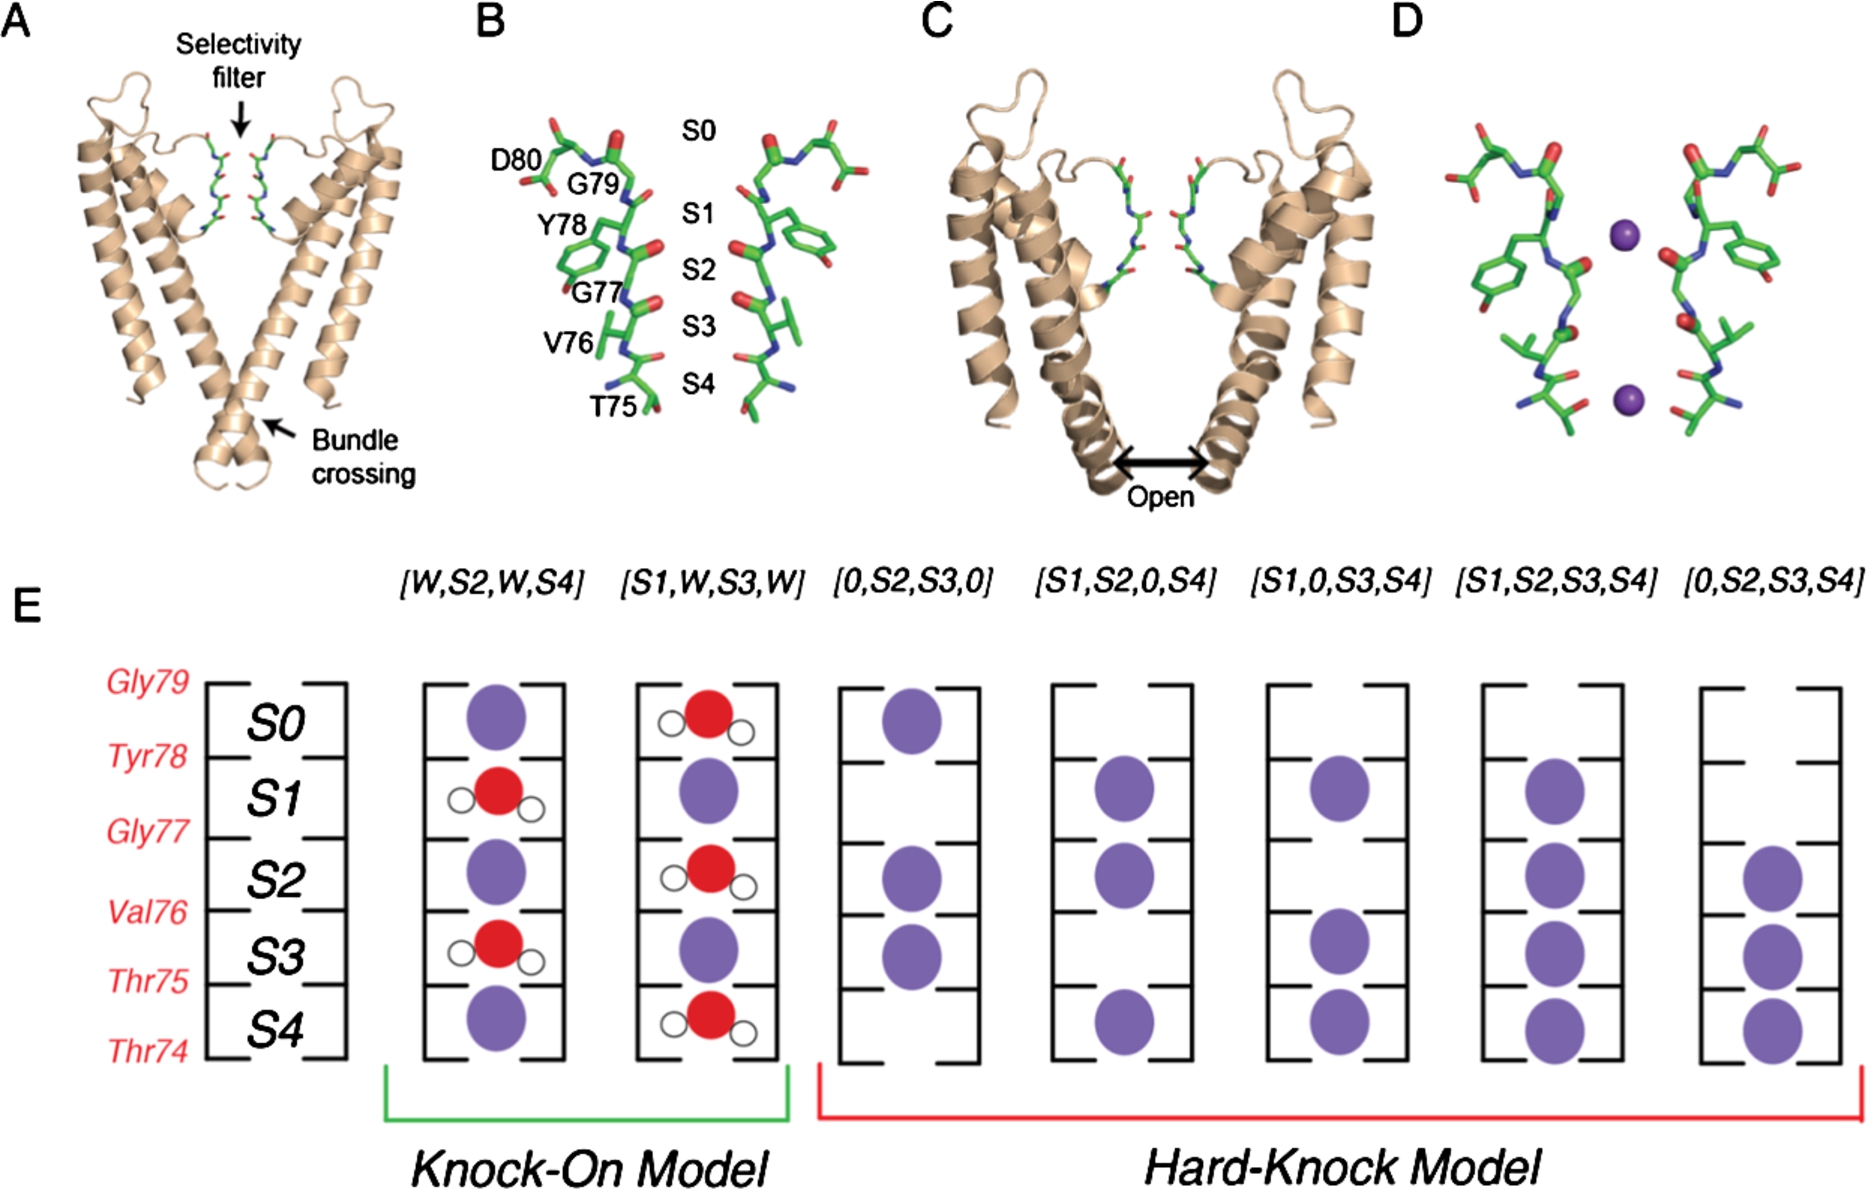 KcsA structure and ion binding configurations. (A) KcsA in the closed conformation (PDB 1K4C), where the intracellular gating helices form an inverted pyramid that occludes ion access to the filter. Only the two opposing subunits are shown for clarity. (B) Selectivity filter of KcsA with ion binding sites (S1-S4, extracellular to intracellular) formed by backbone carbonyls of the residues Thr75-Gly79. (C) Structure of the open conformation of KcsA (PDB 3F5W) where the helices splay open. (D) Structure of the selectivity filter in the constricted conformation (from PDB 1K4D). K+ ions are shown in purple. (E) Cartoon illustration of the two ion permeation models: the knock on model (two configurations on the left) and the hard-knock model (five configurations on the right). Waters are represented in red and K+ ions are represented in purple.